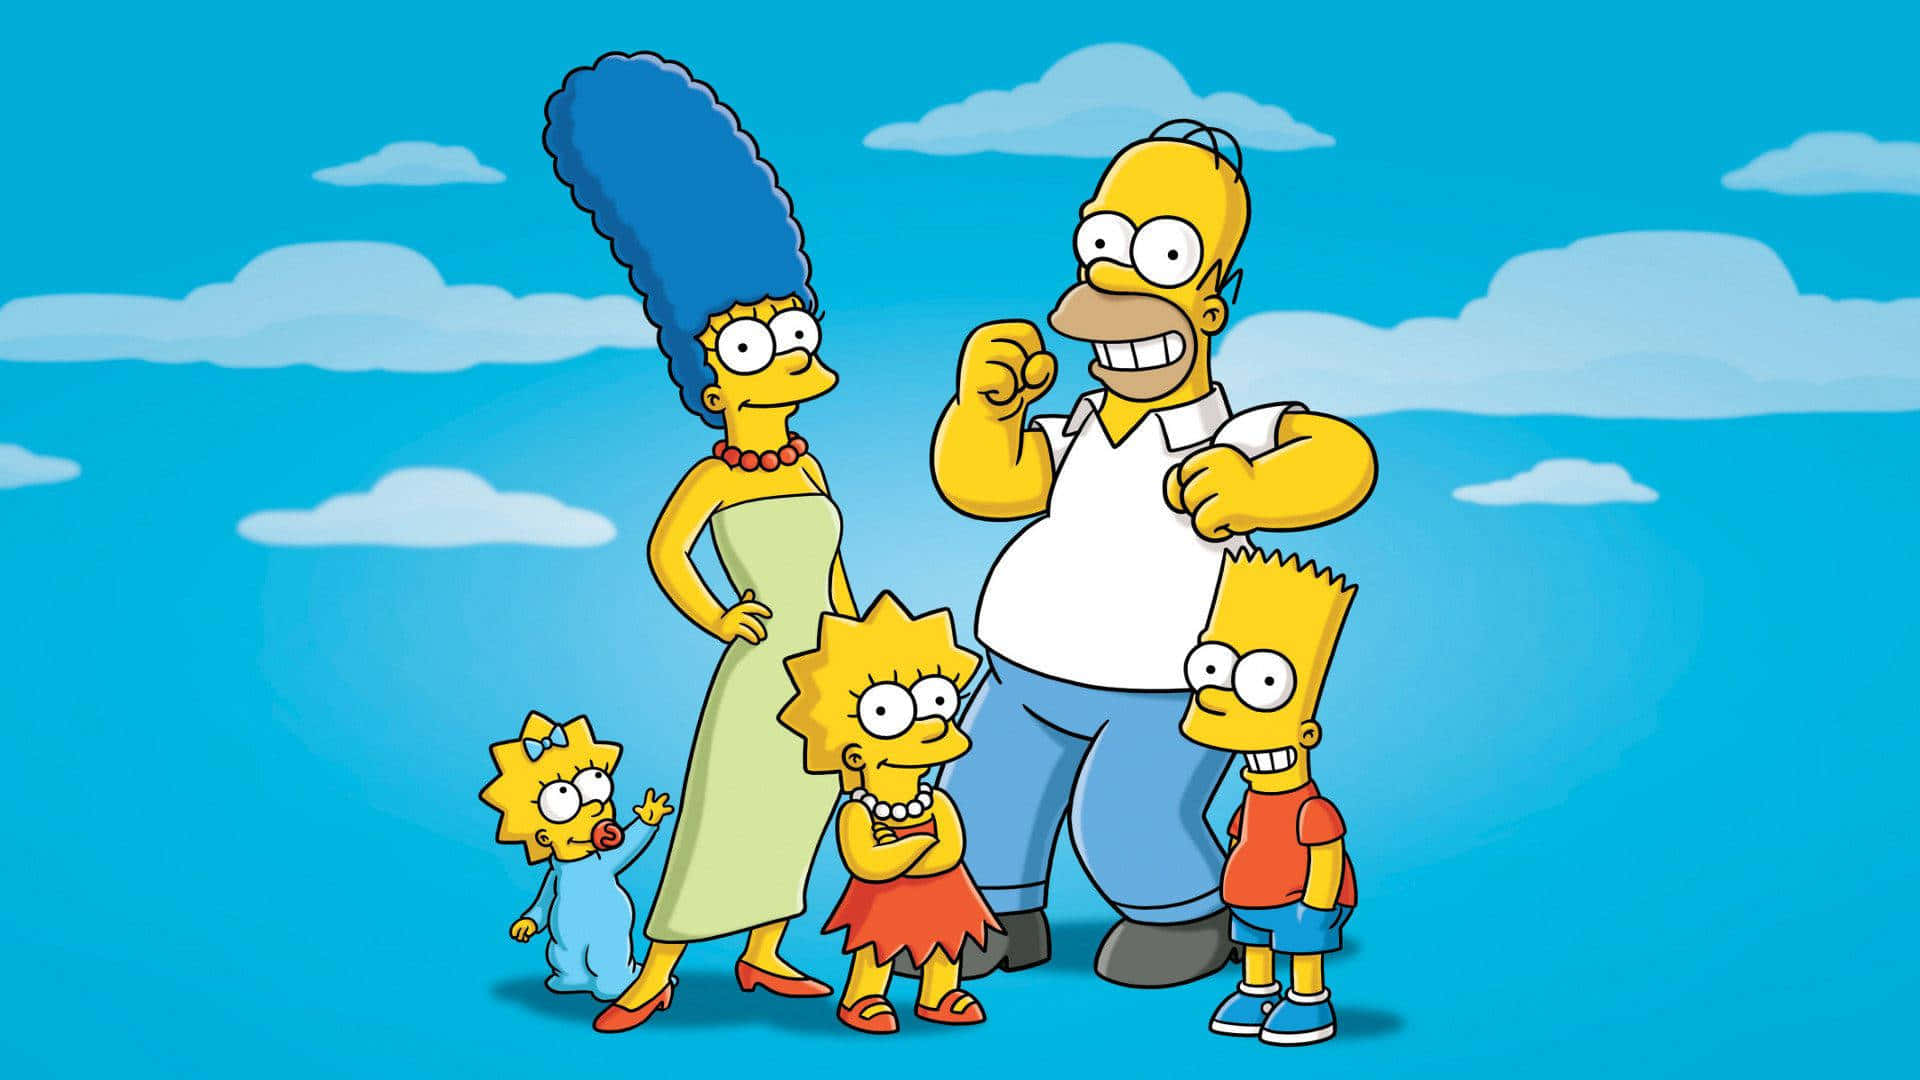 "A family like no other - The Simpsons."